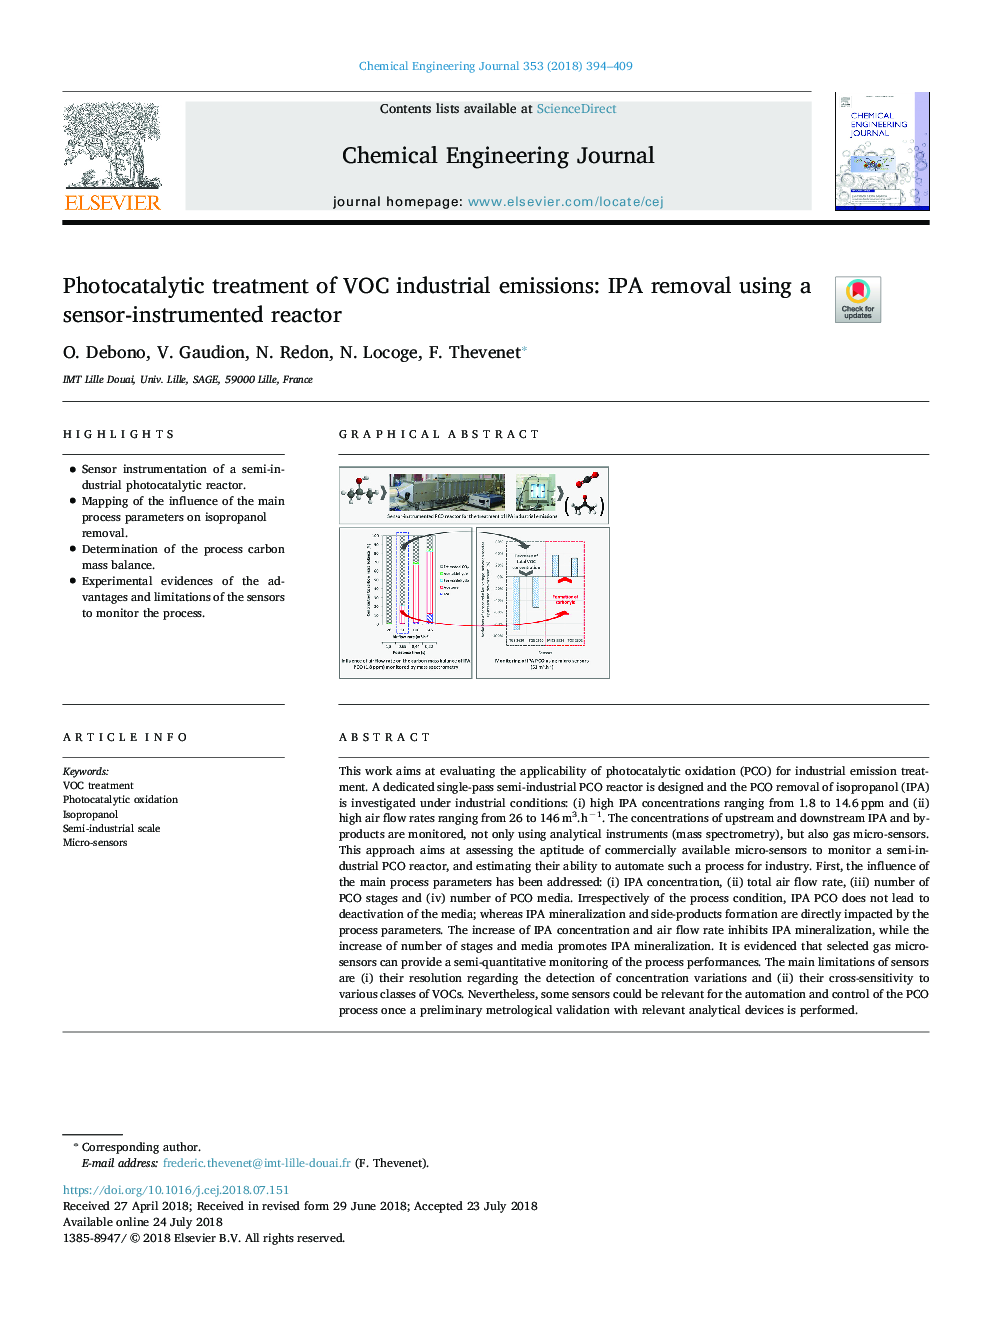 Photocatalytic treatment of VOC industrial emissions: IPA removal using a sensor-instrumented reactor